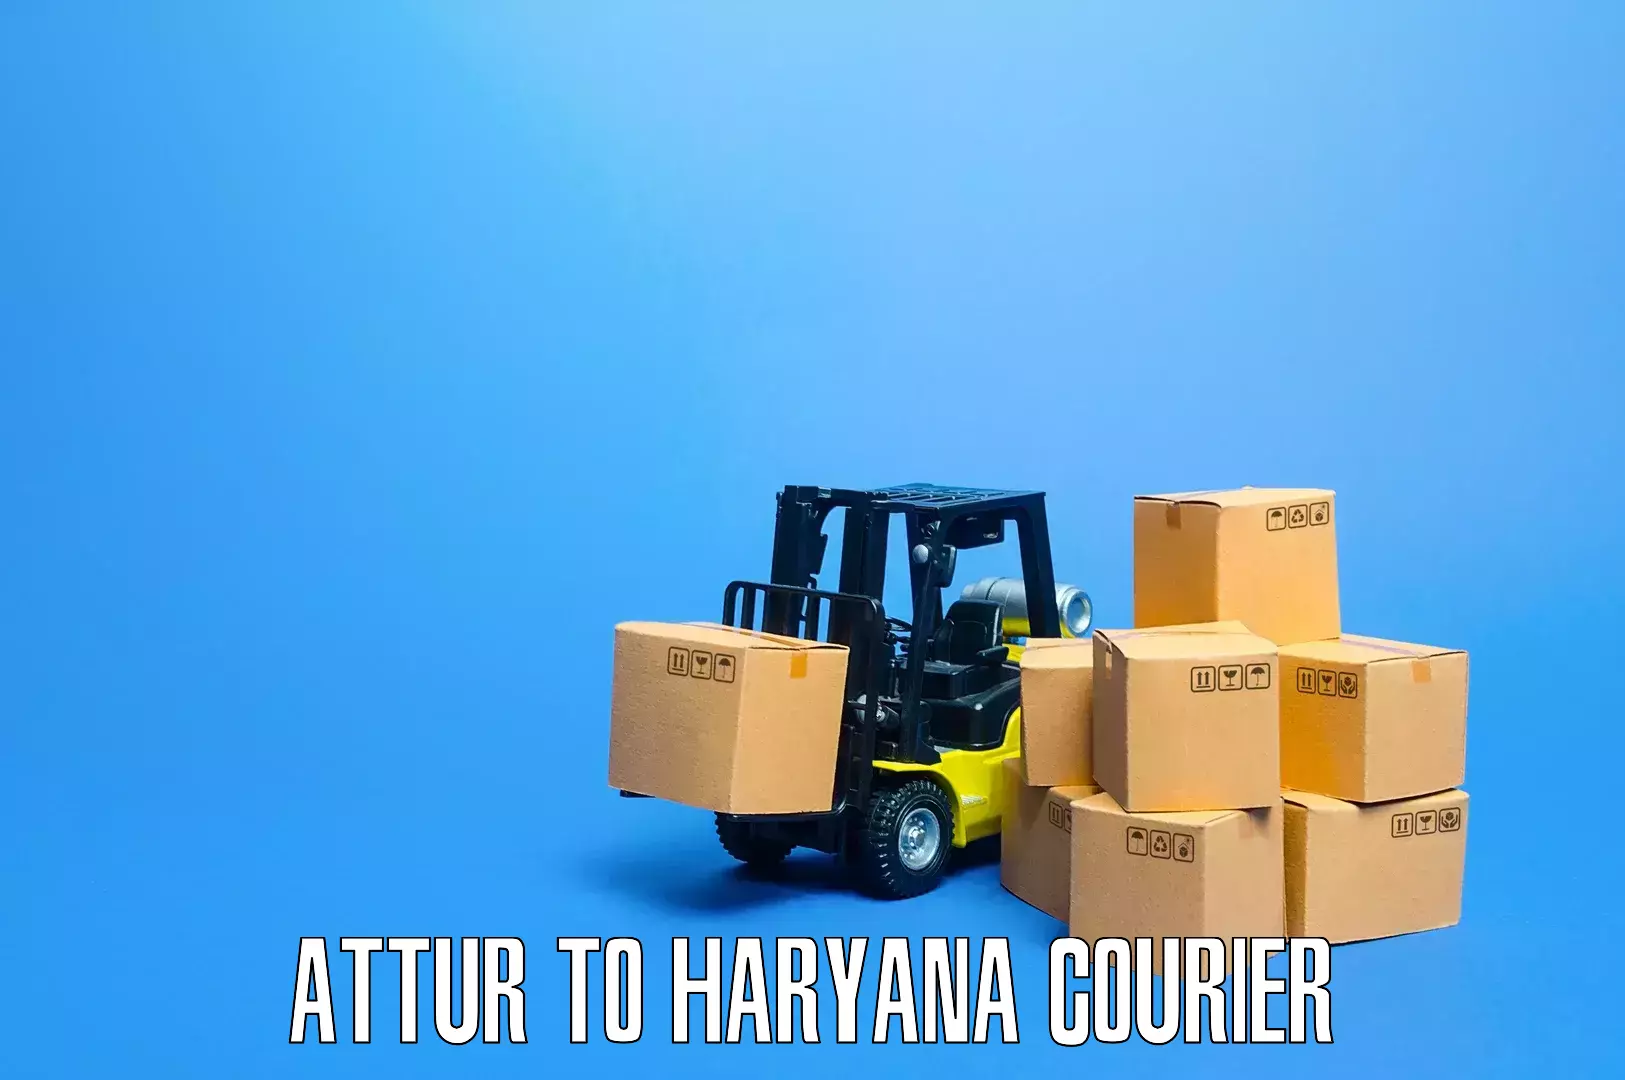 Nationwide household movers Attur to Chirya